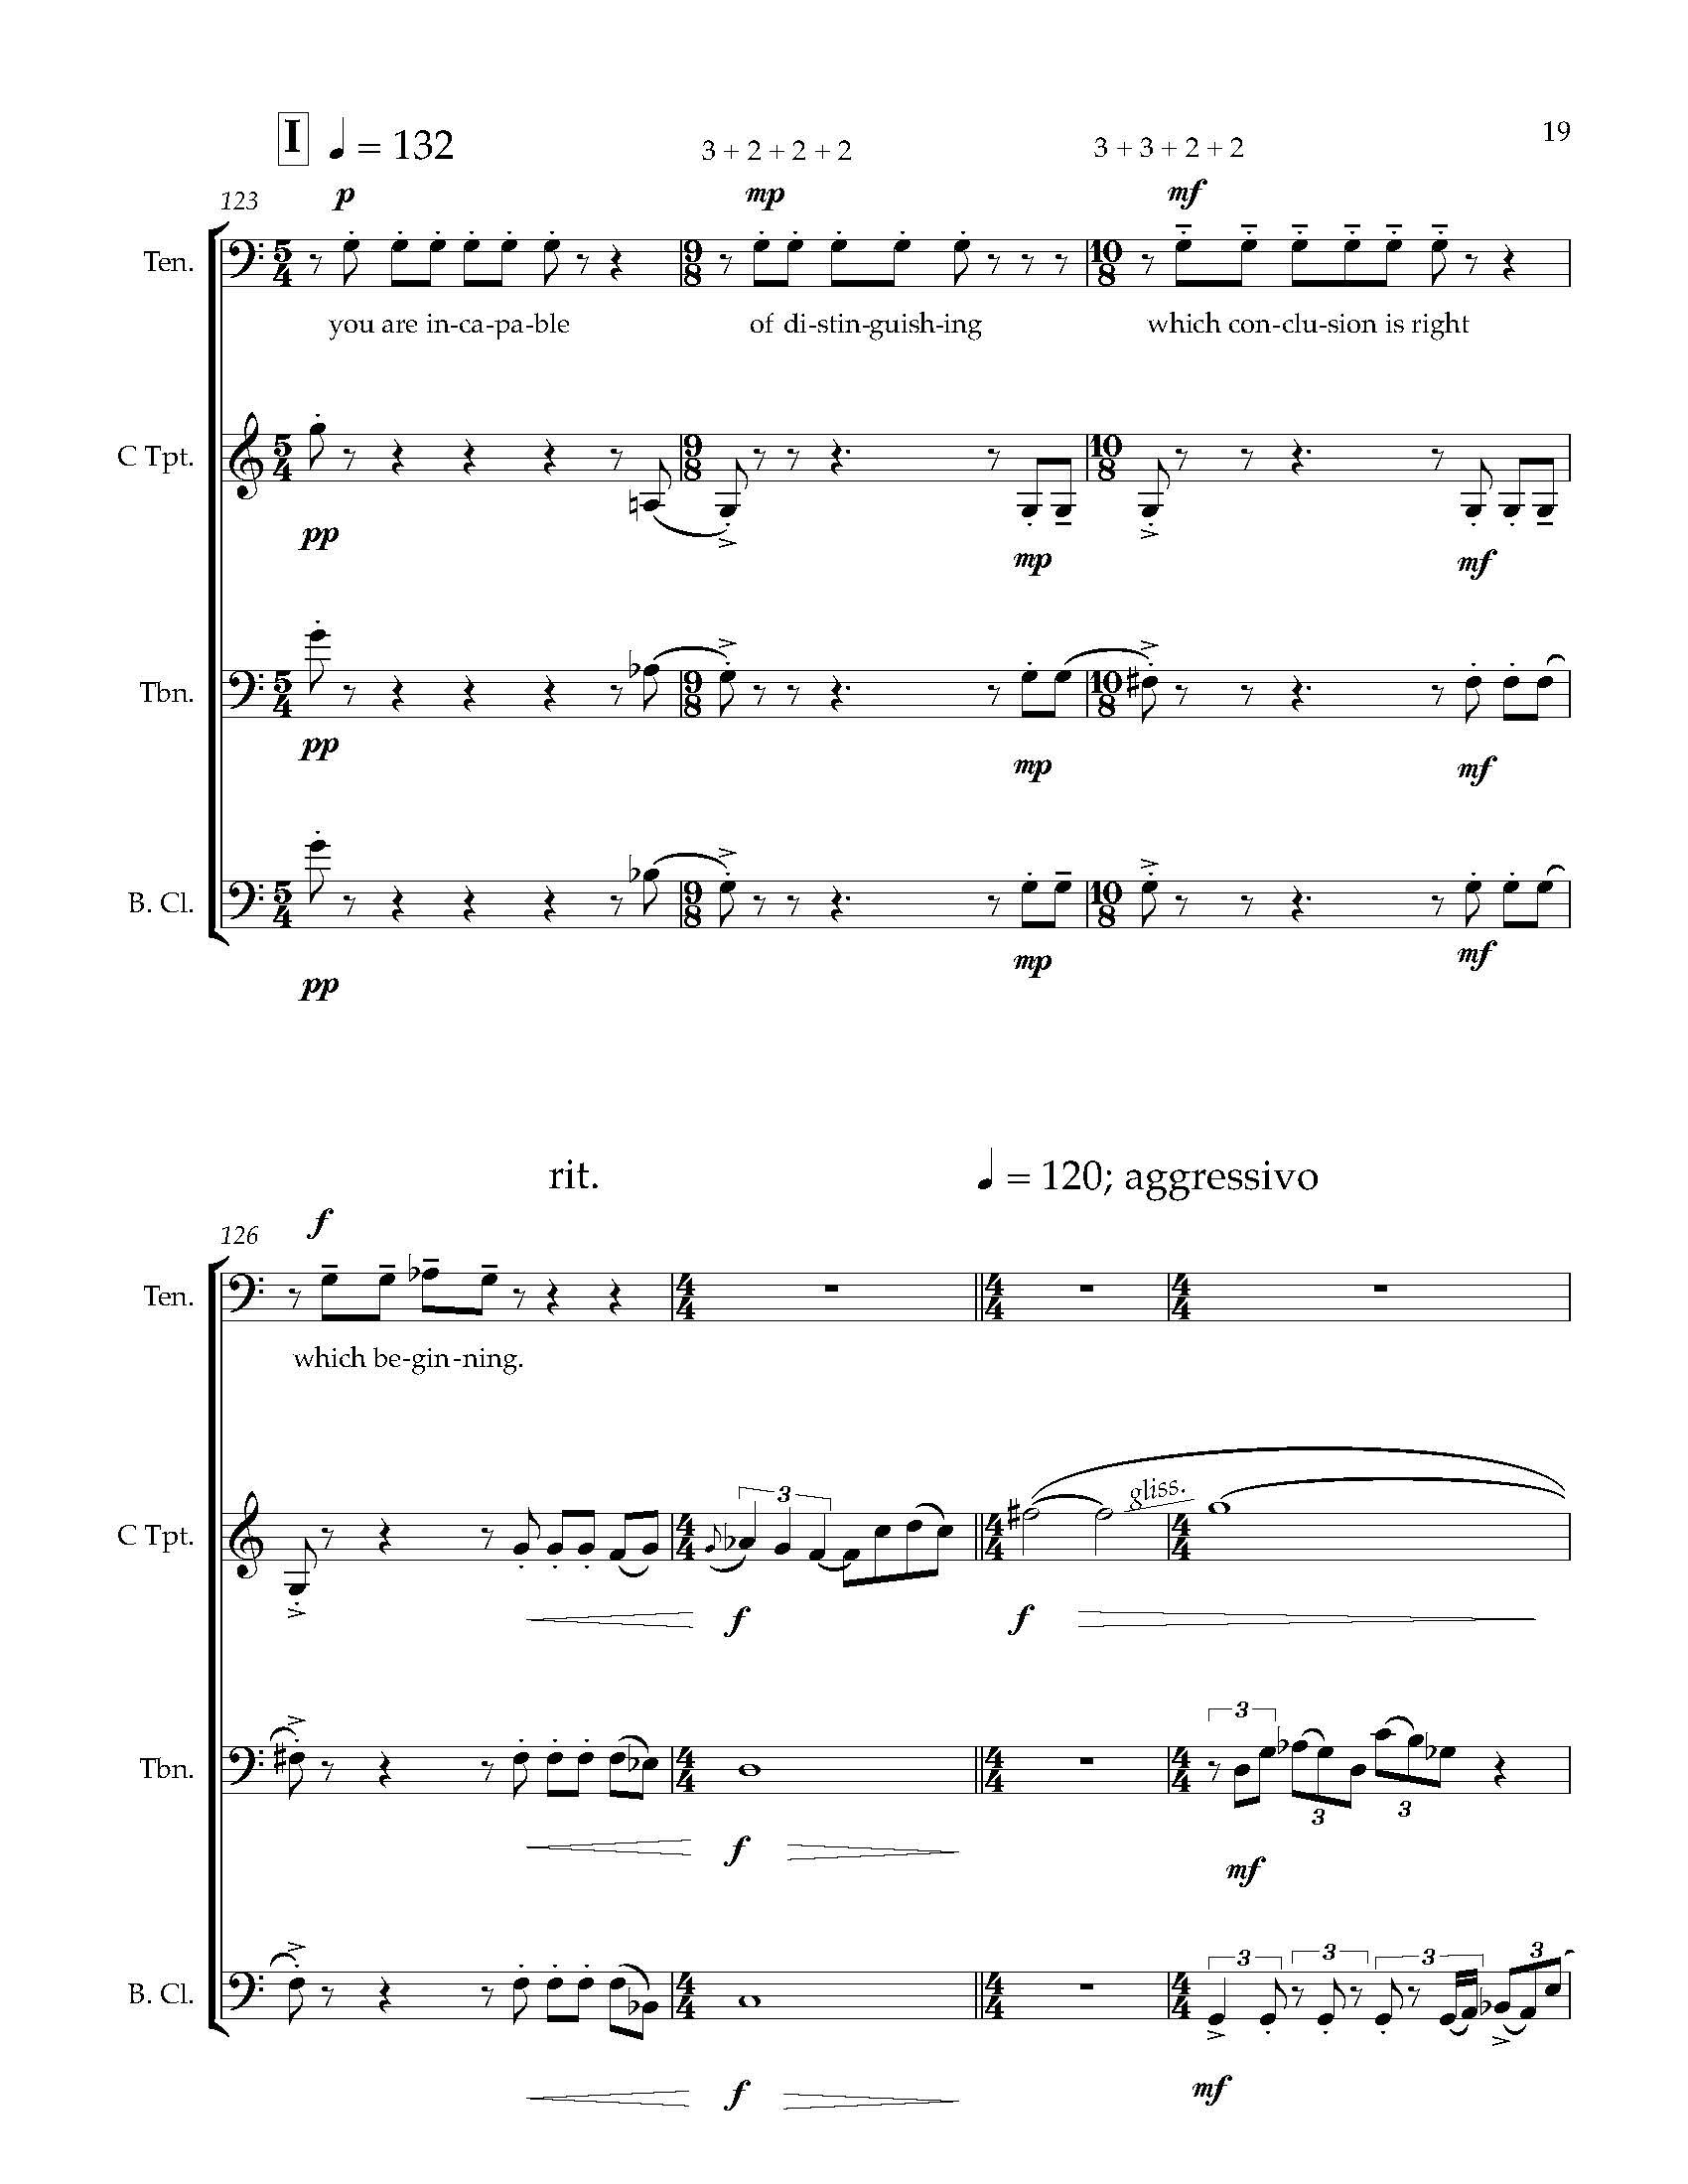 Many Worlds [1] - Complete Score_Page_28.jpg